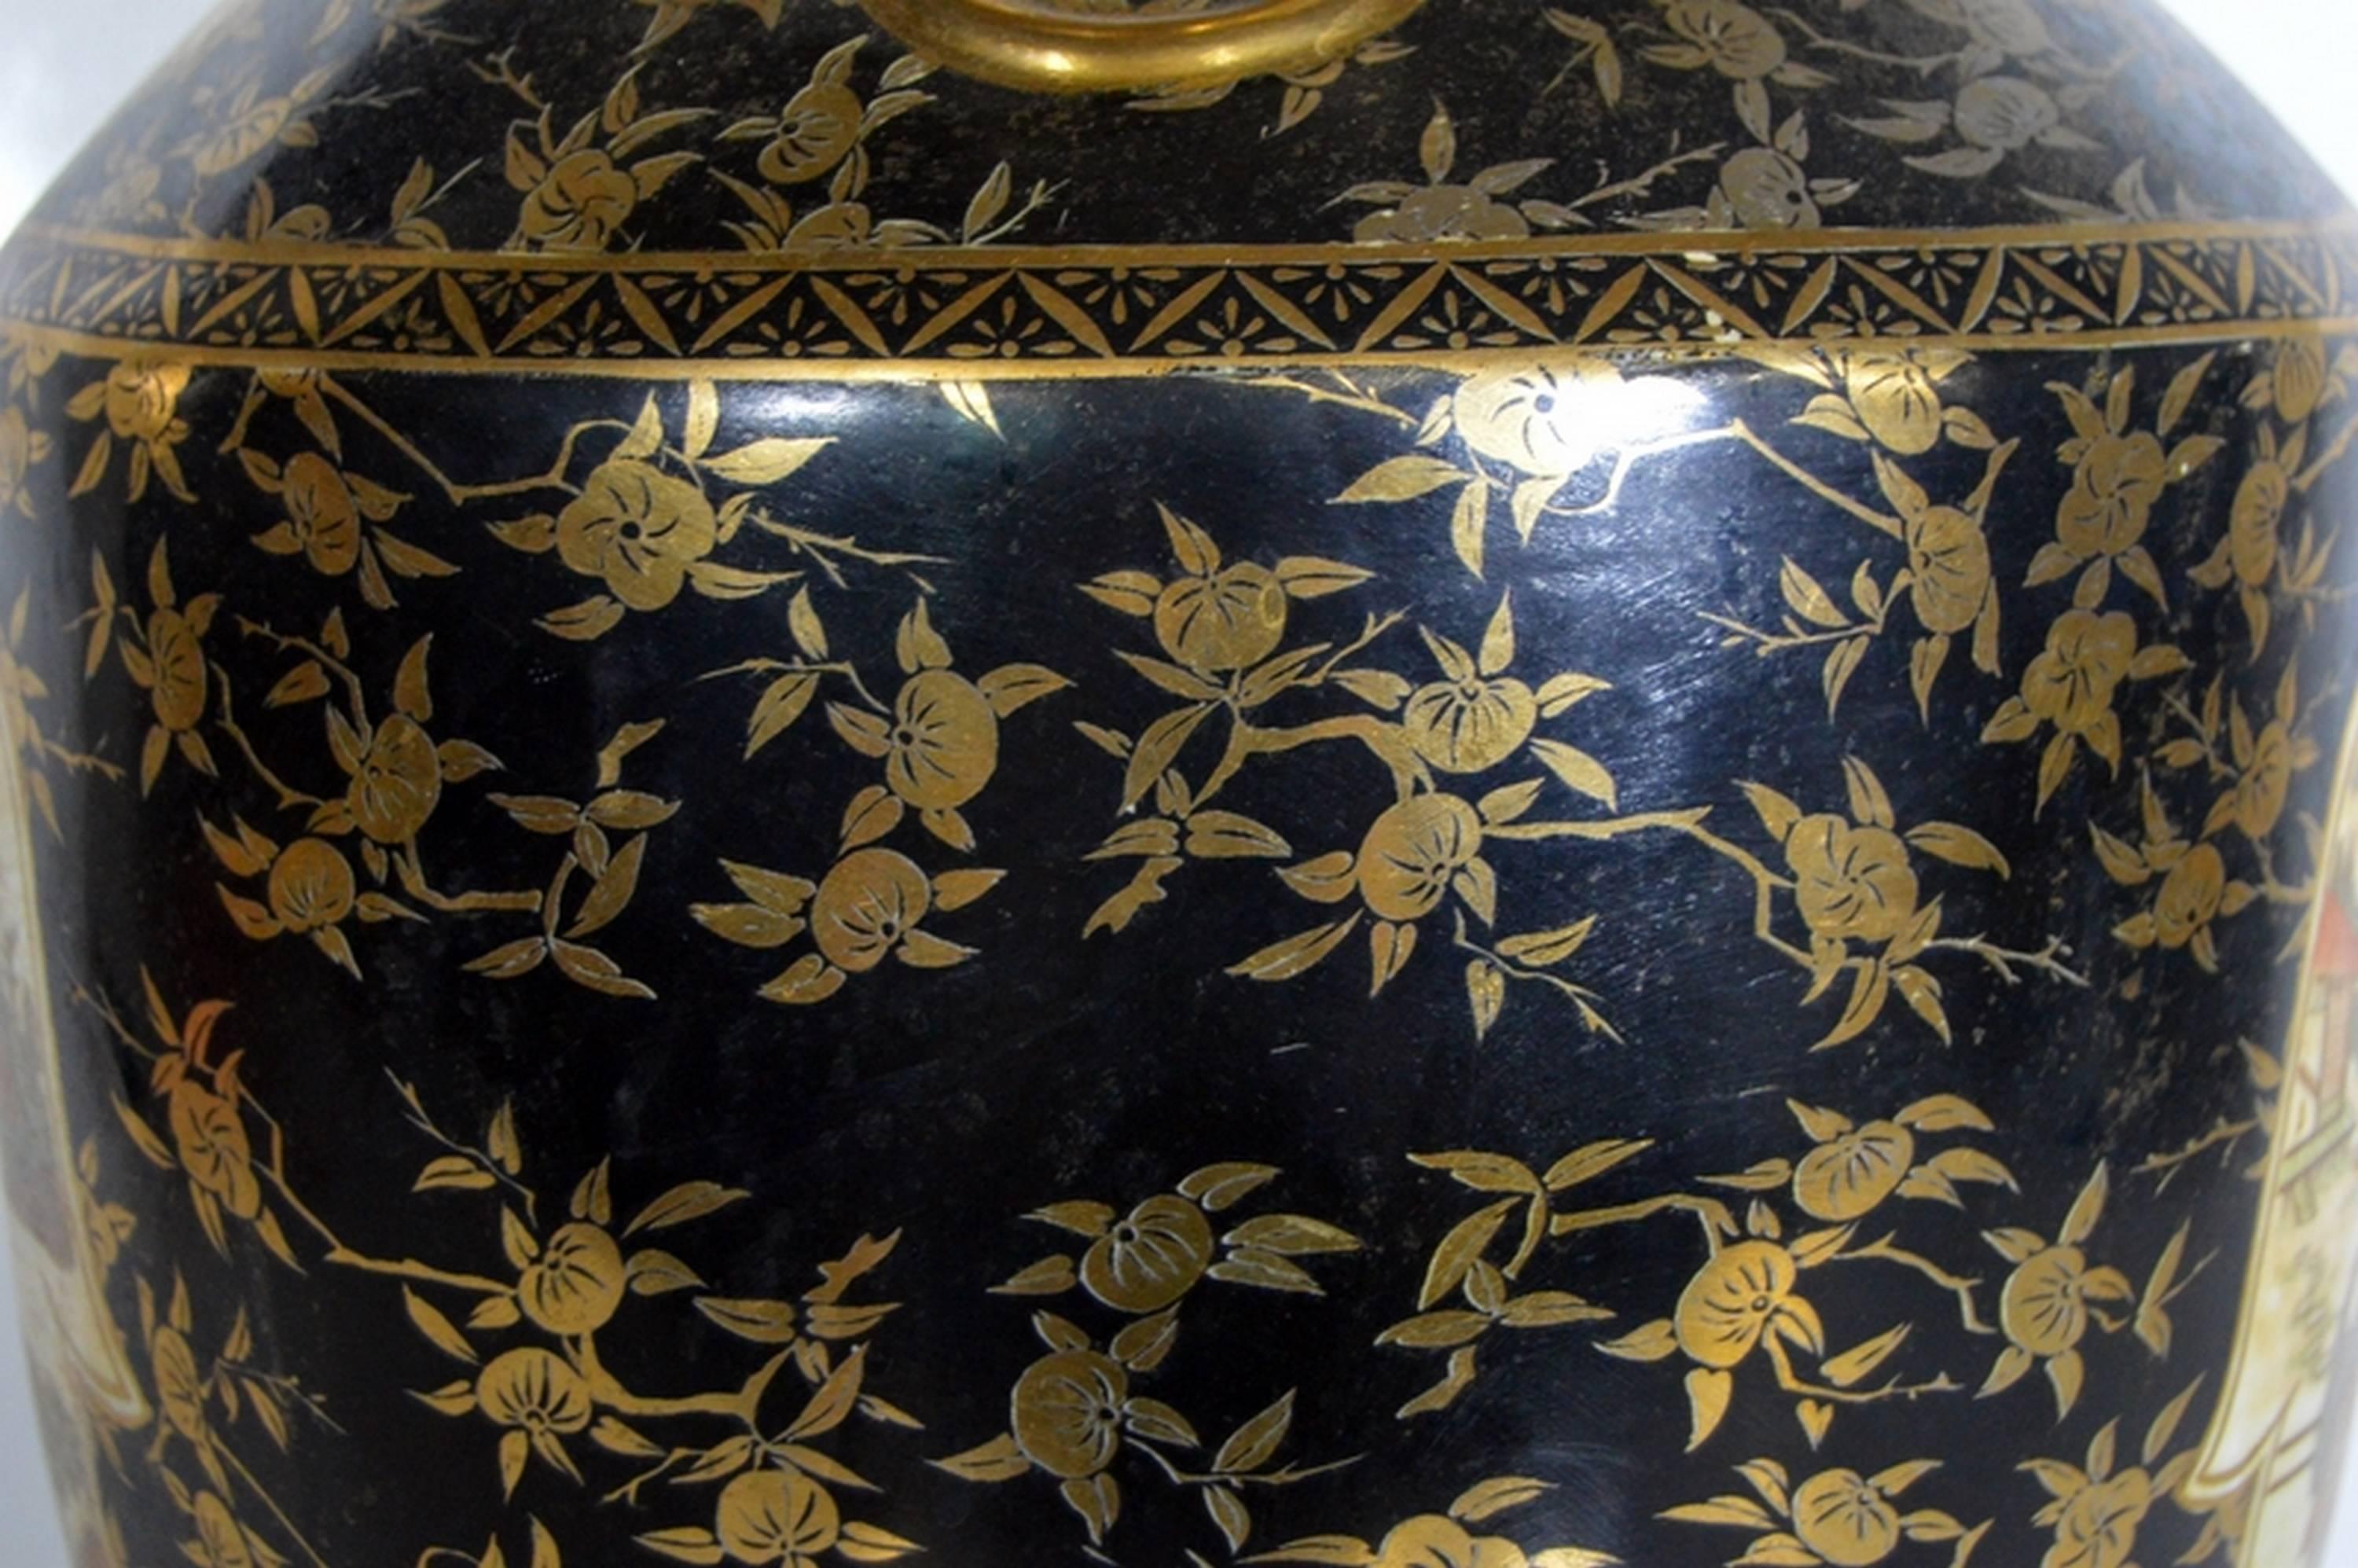 Vintage Hand-Painted Porcelain Vase with Gilded Accents from 20th Century, China For Sale 3